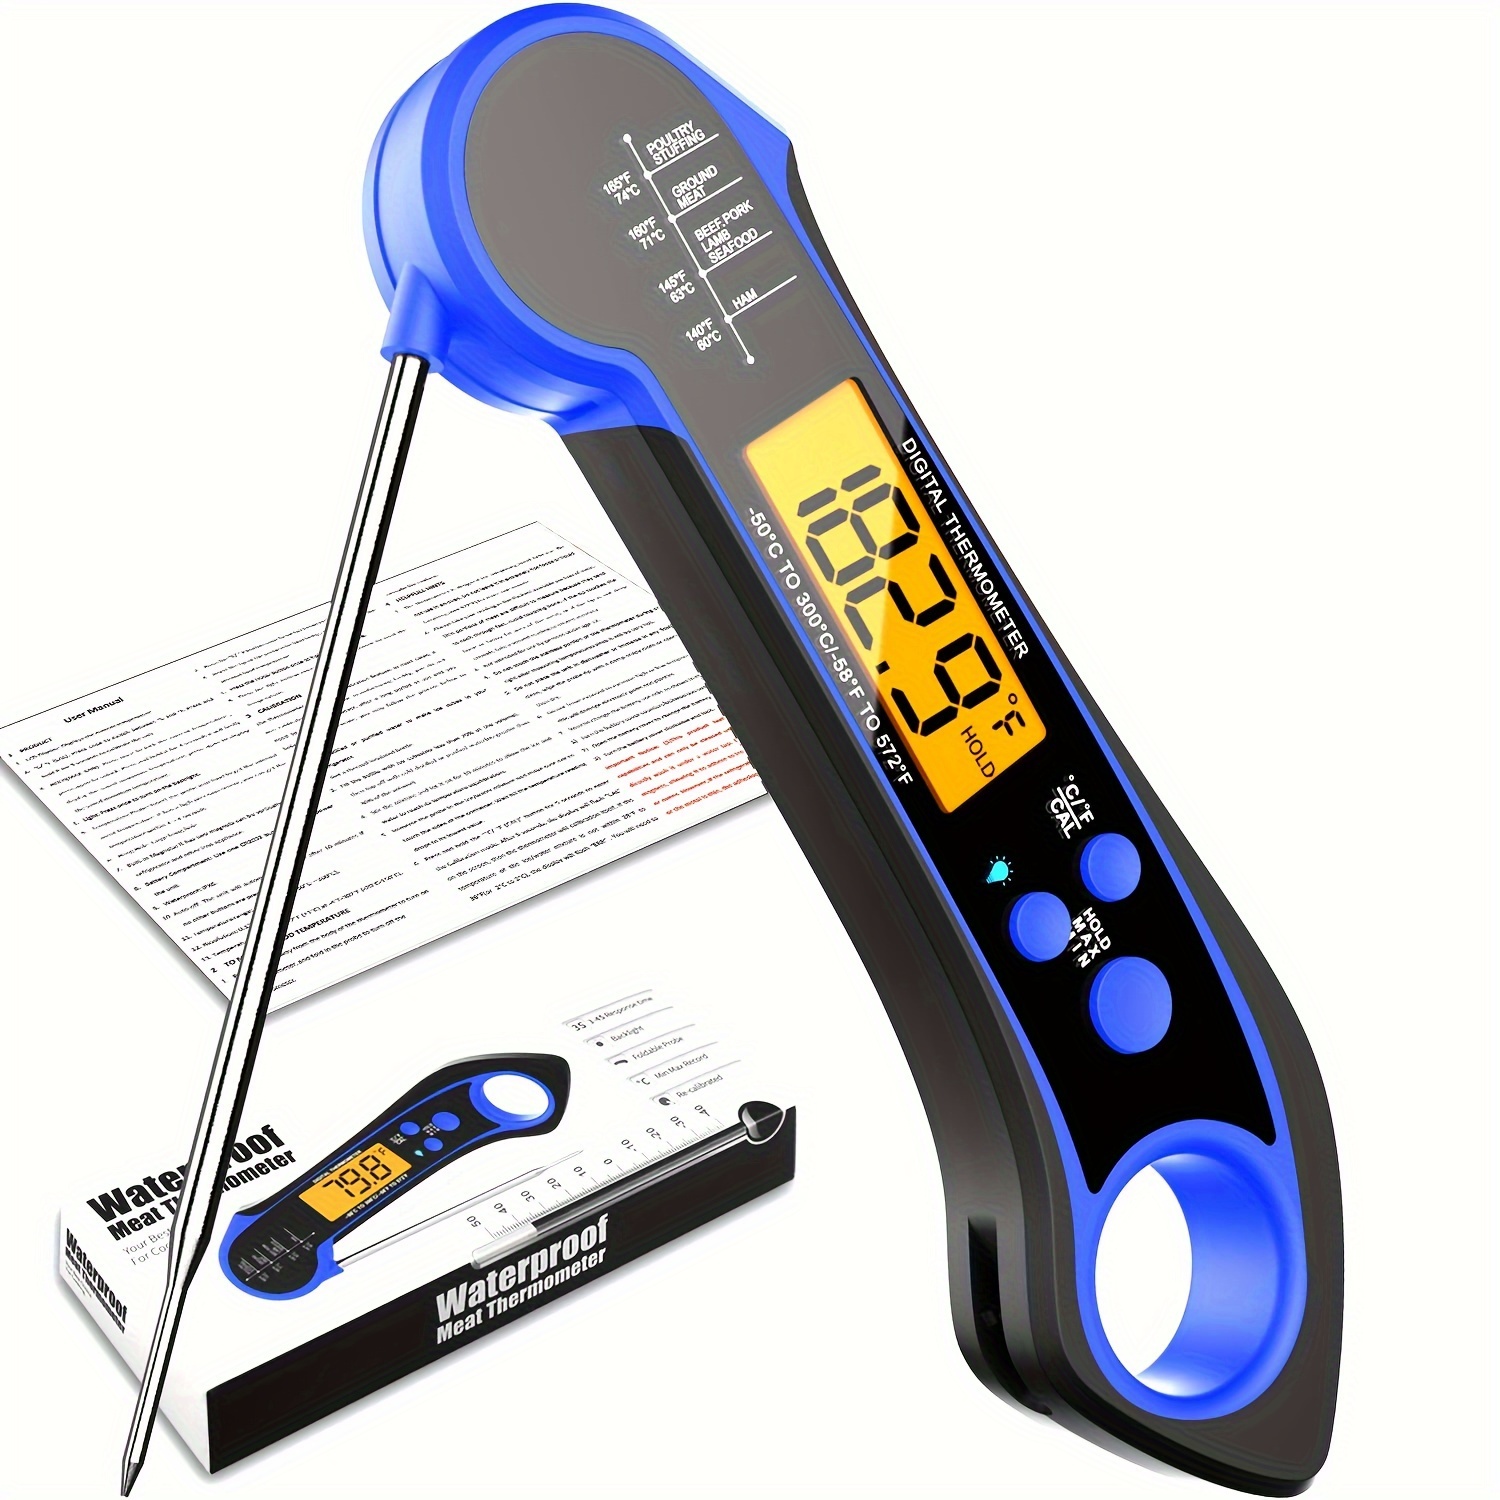 

Digital Food Thermometer With Magnetic Base - Rechargeable, Waterproof Kitchen & Restaurant Meat Temperature Gauge